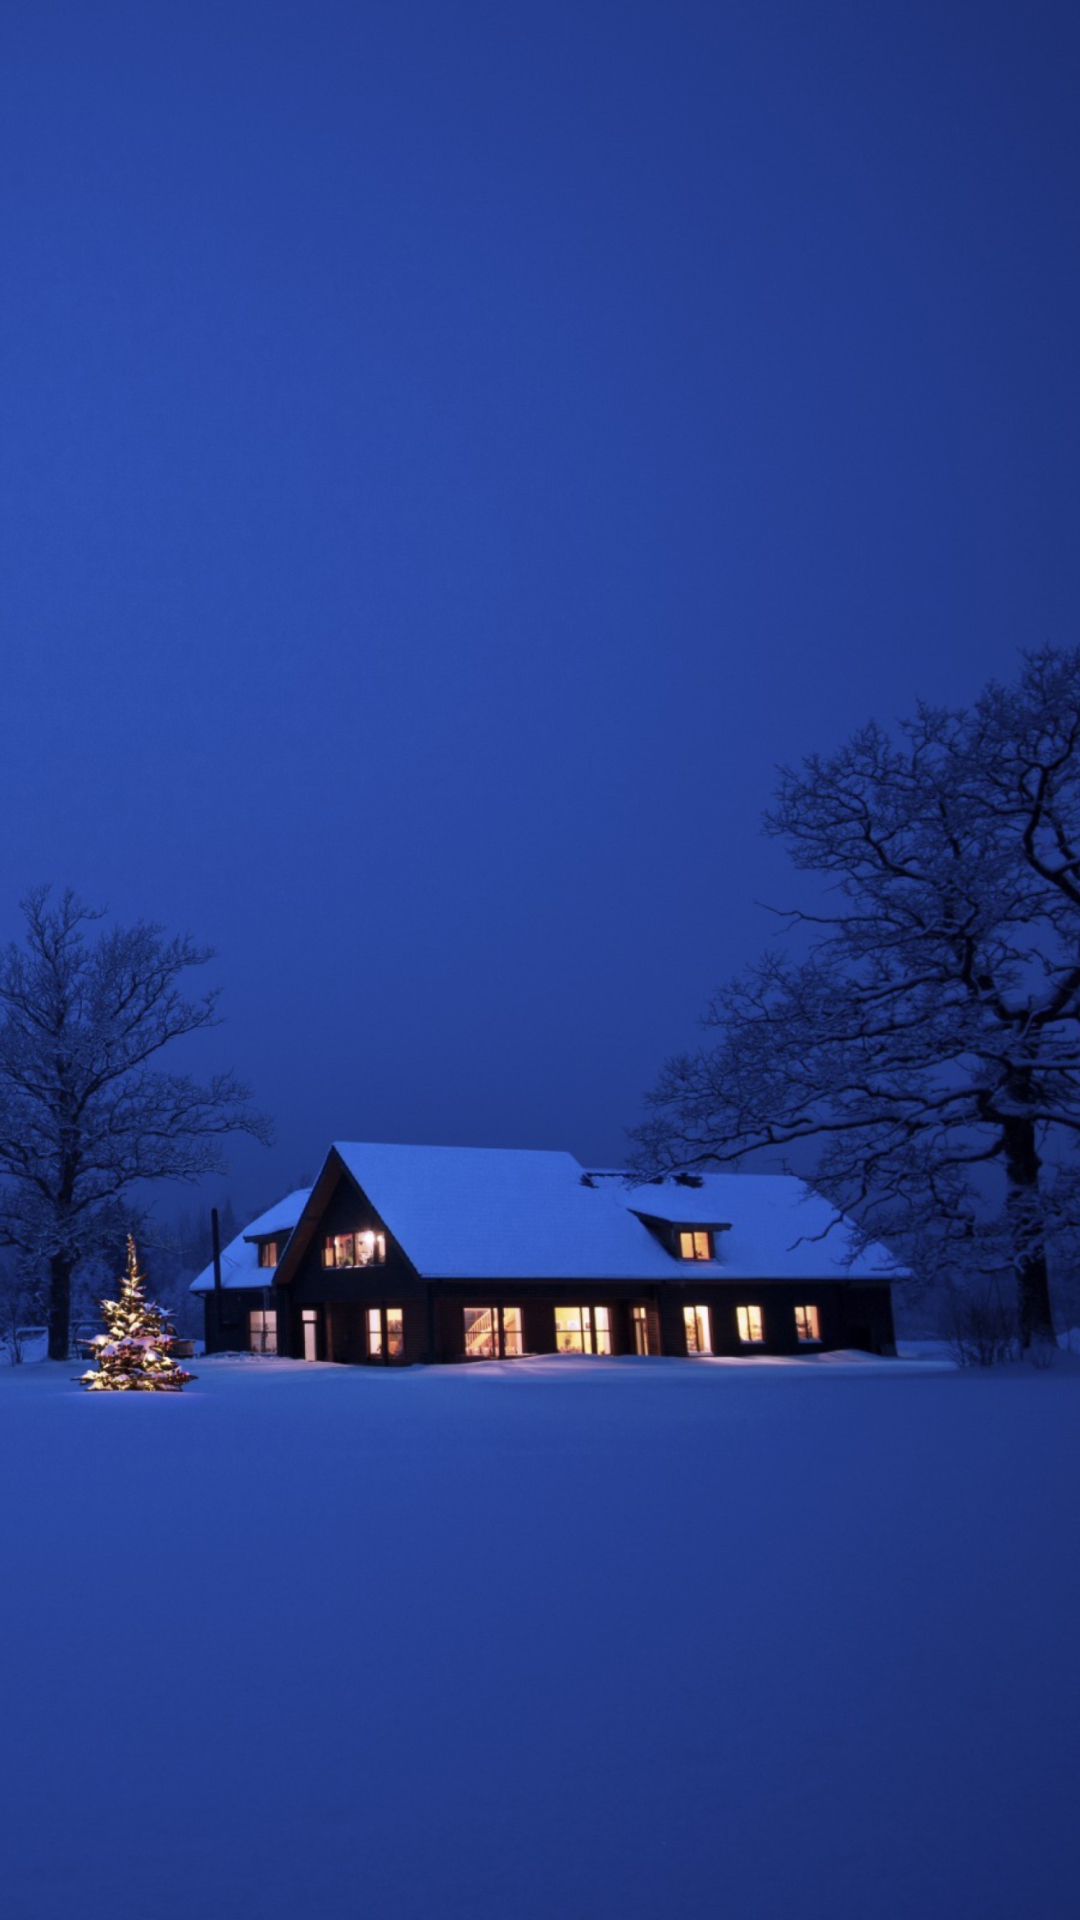 Lonely House, Winter Landscape And Christmas Tree screenshot #1 1080x1920